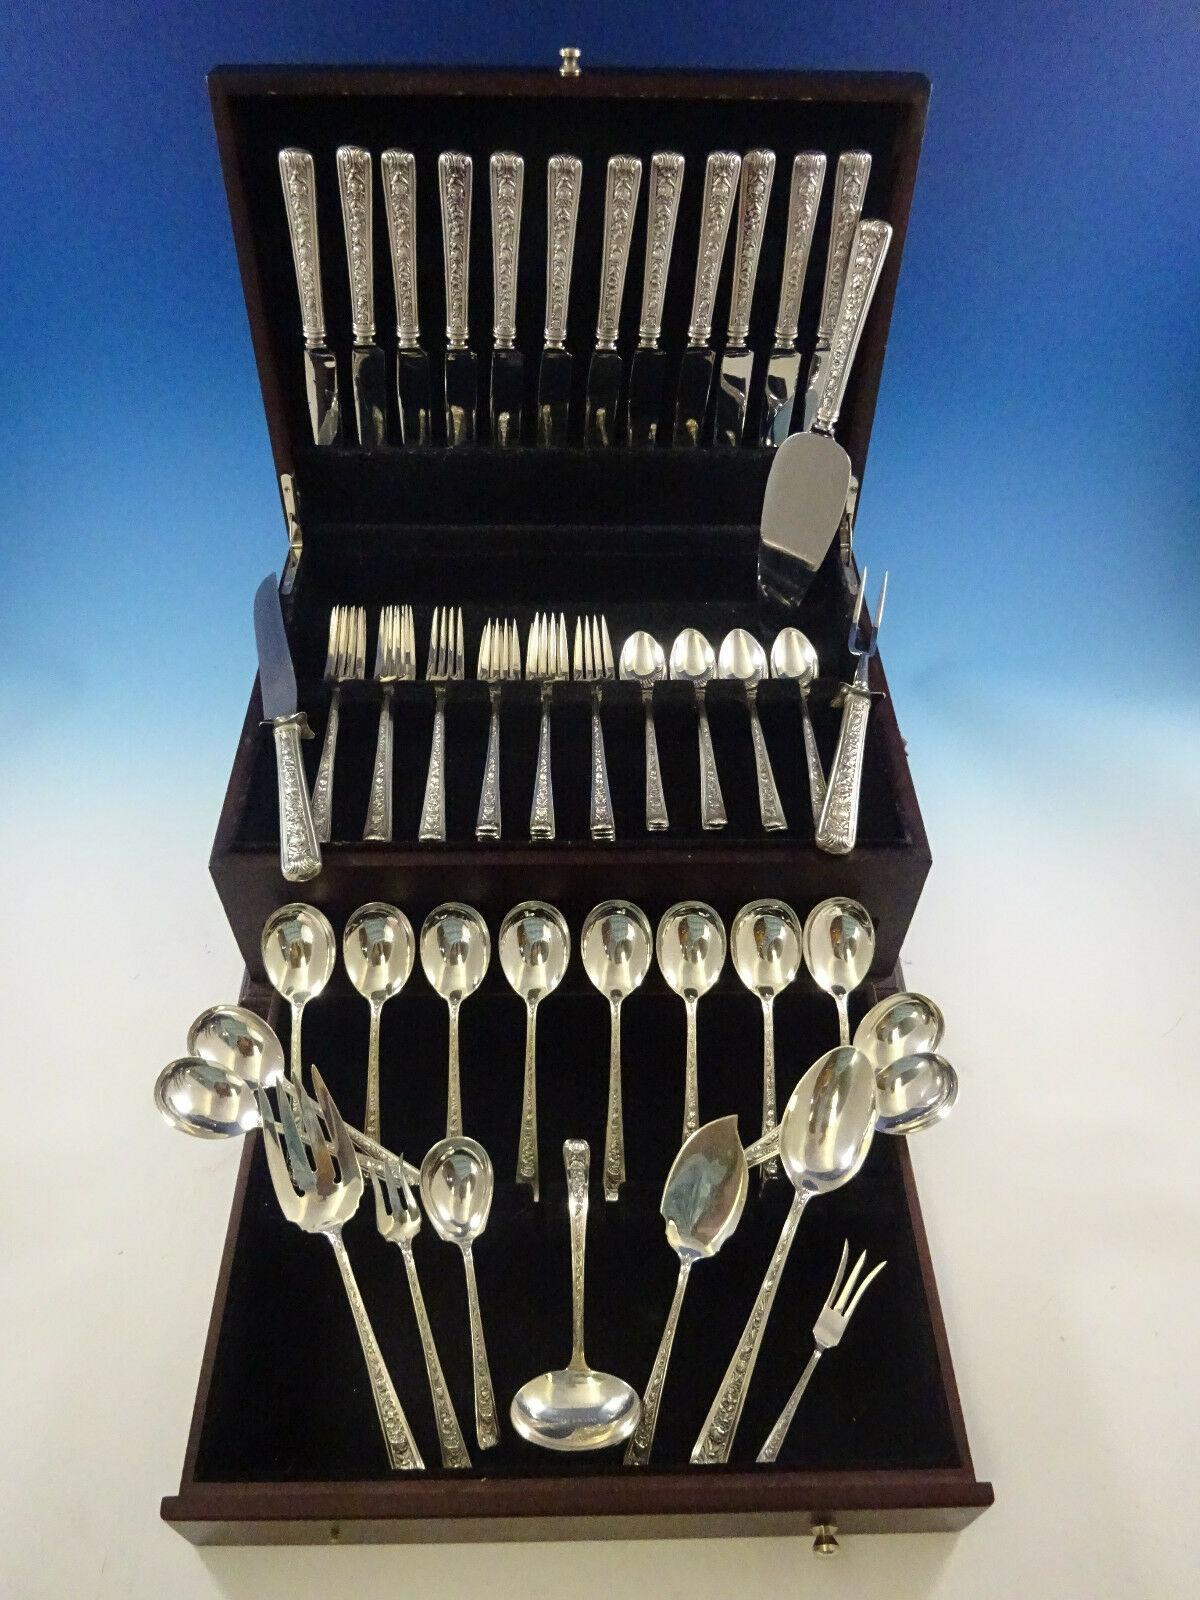 Exquisite Windsor rose by Watson Sterling silver flatware set-70 pieces. This set includes:

12 knives, 9 1/8